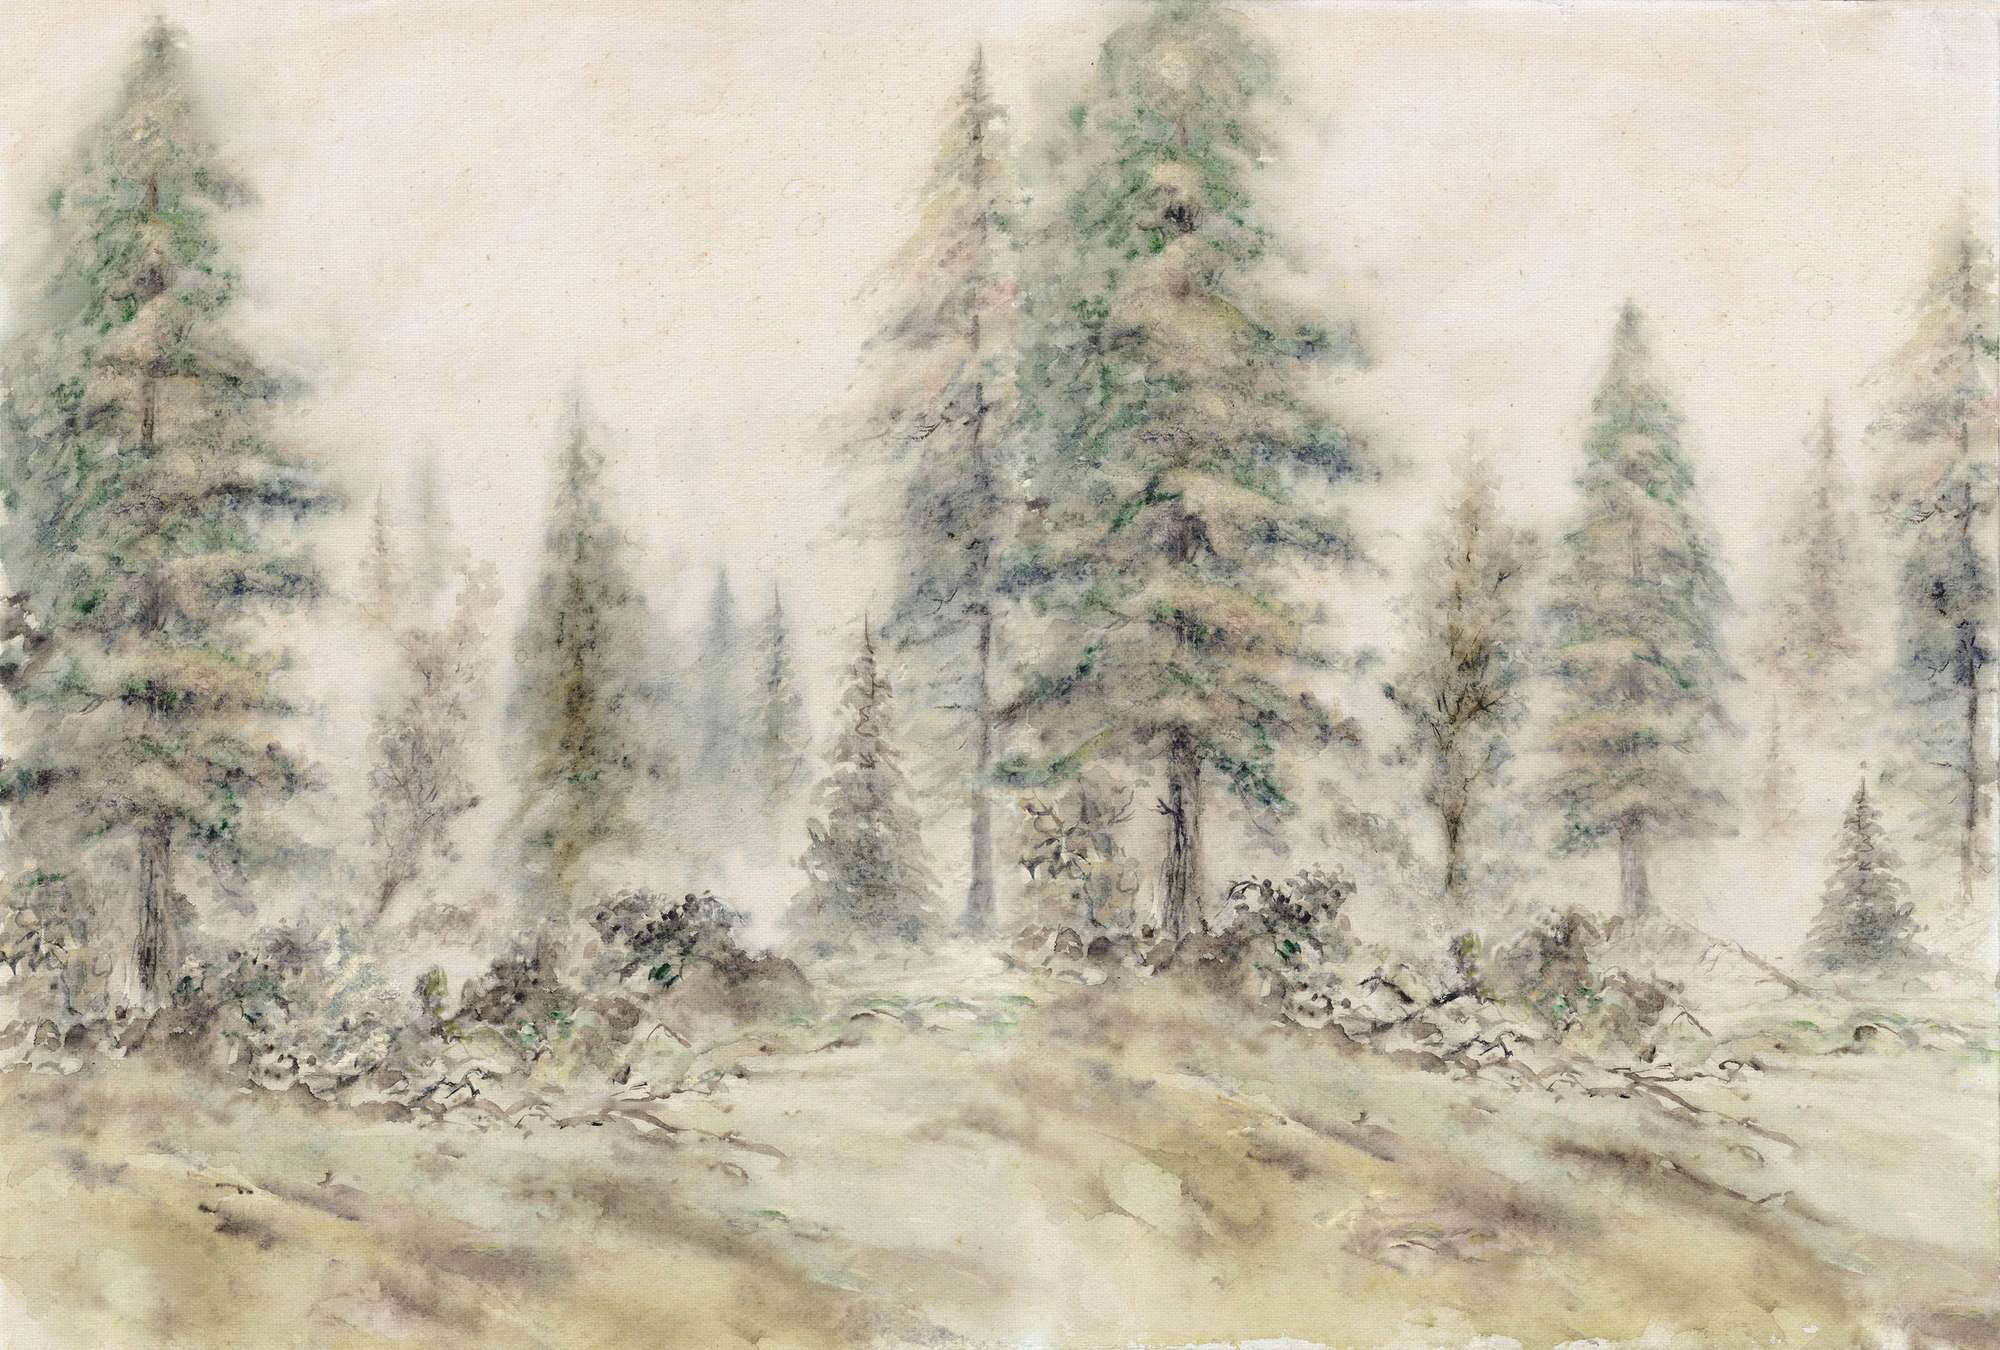             Forest mural, trees & landscape in watercolour style - brown, green, beige
        